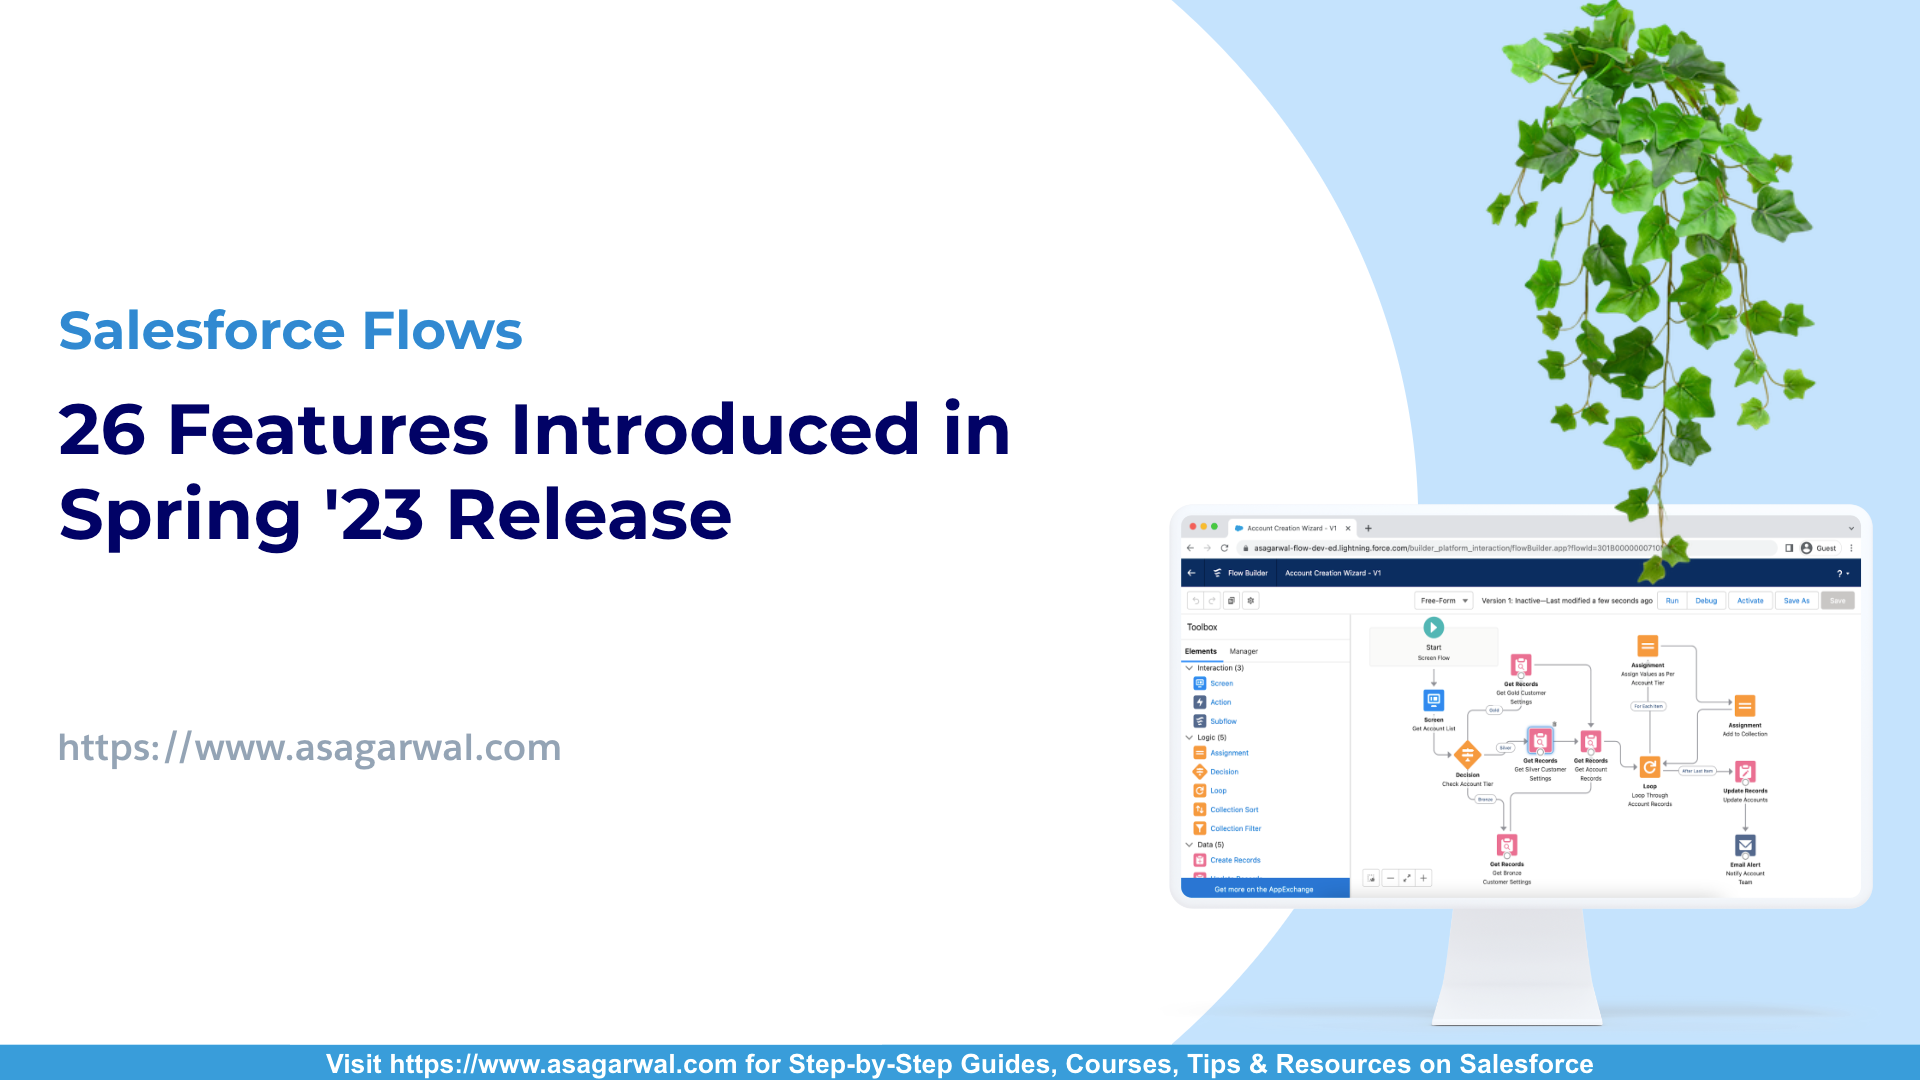 Salesforce Flows - 26 Features Introduced in Spring '23 Release